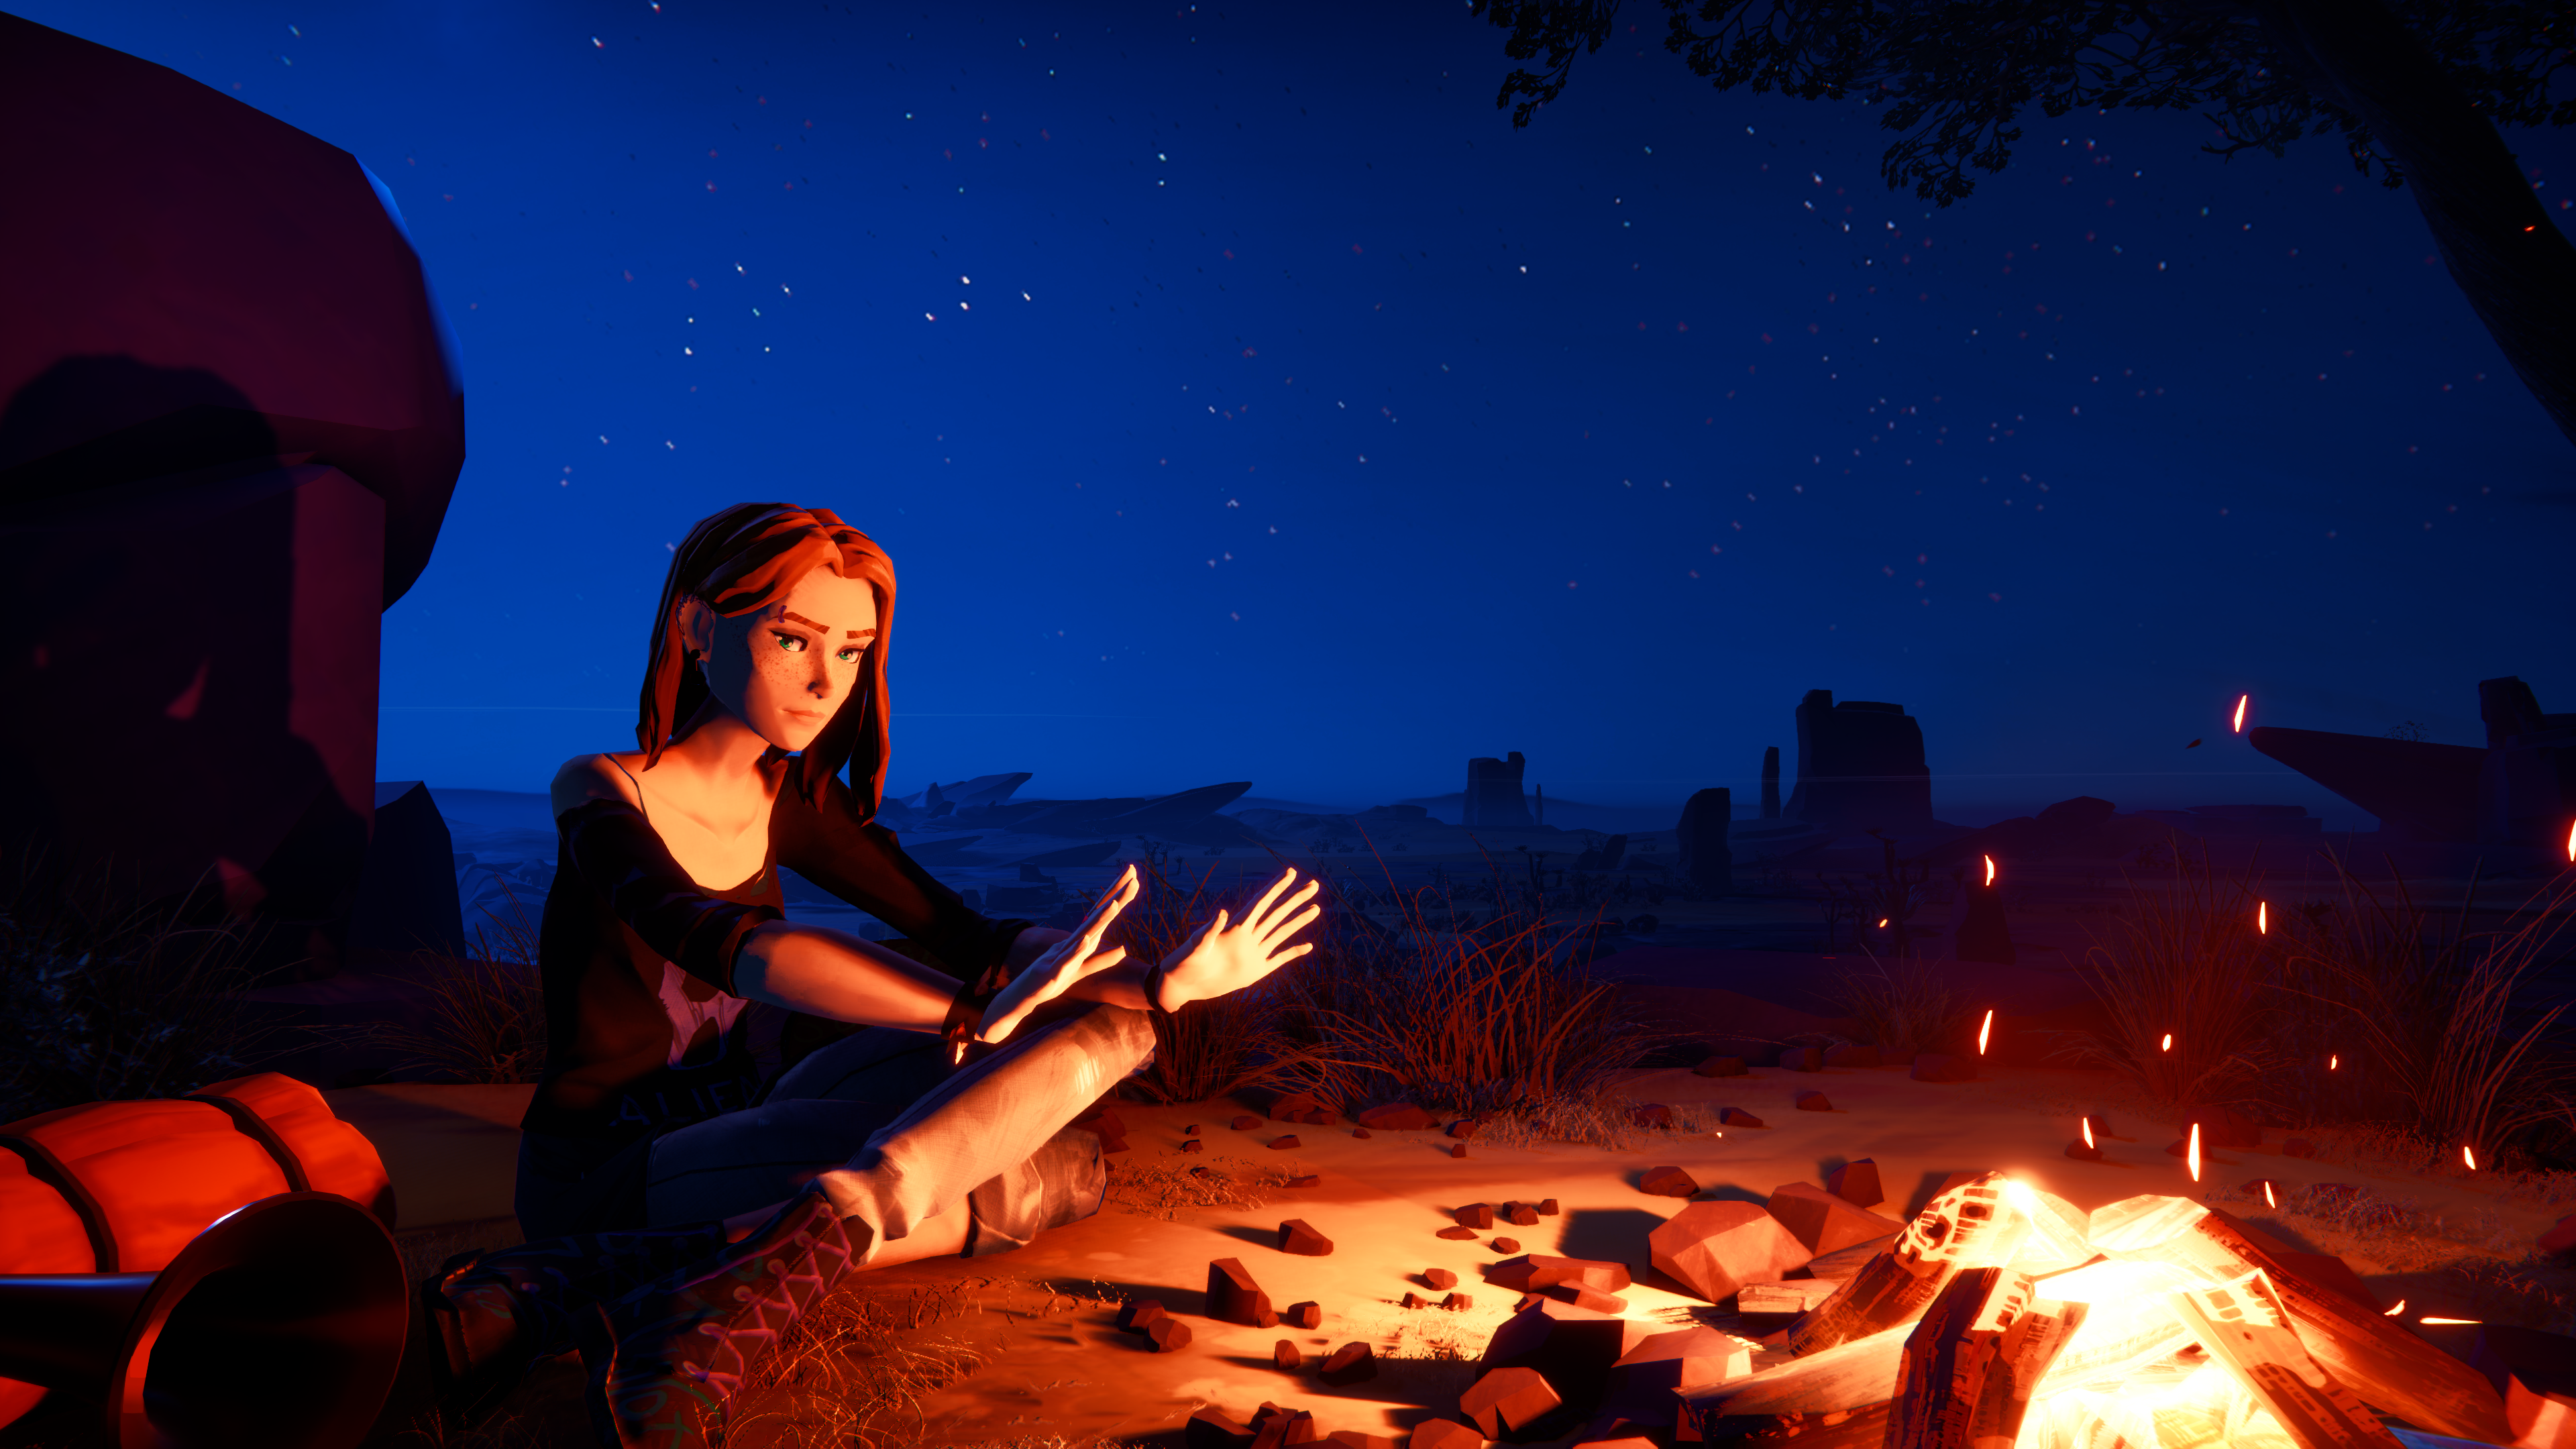 Road 96 character sitting by a fire in a desert at night, warming her hands